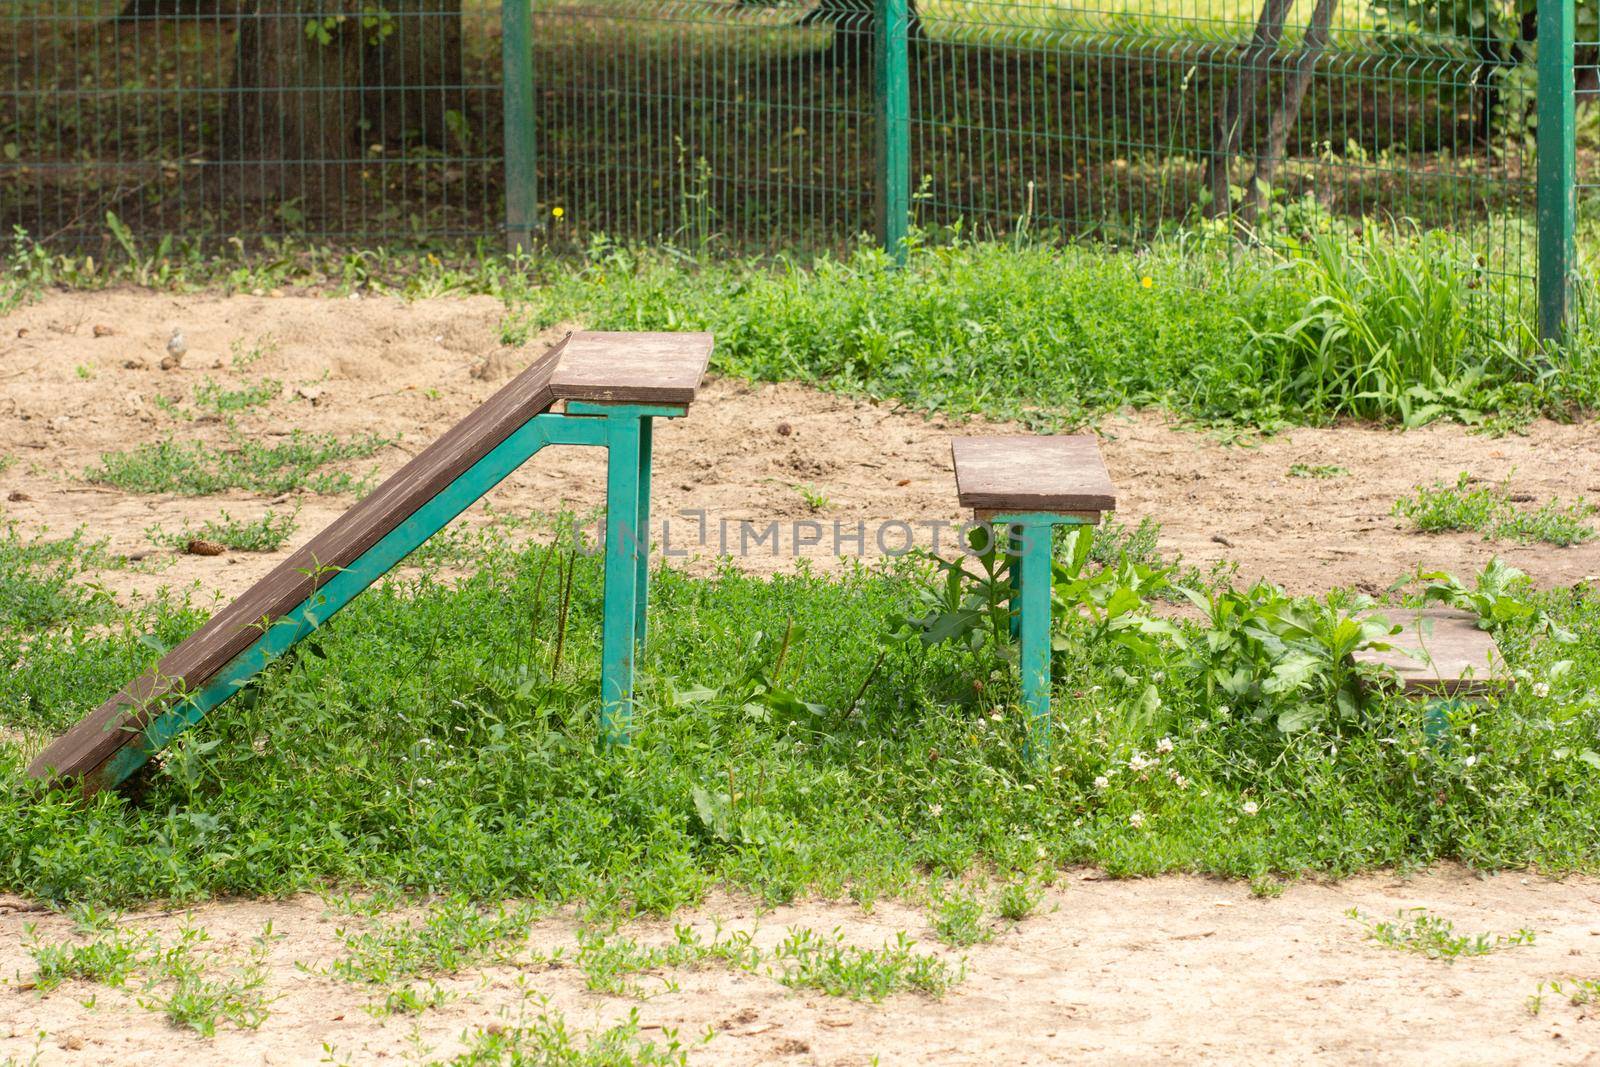 Wooden bar jump hurdles wall barriers of different height for dog training in park for dog